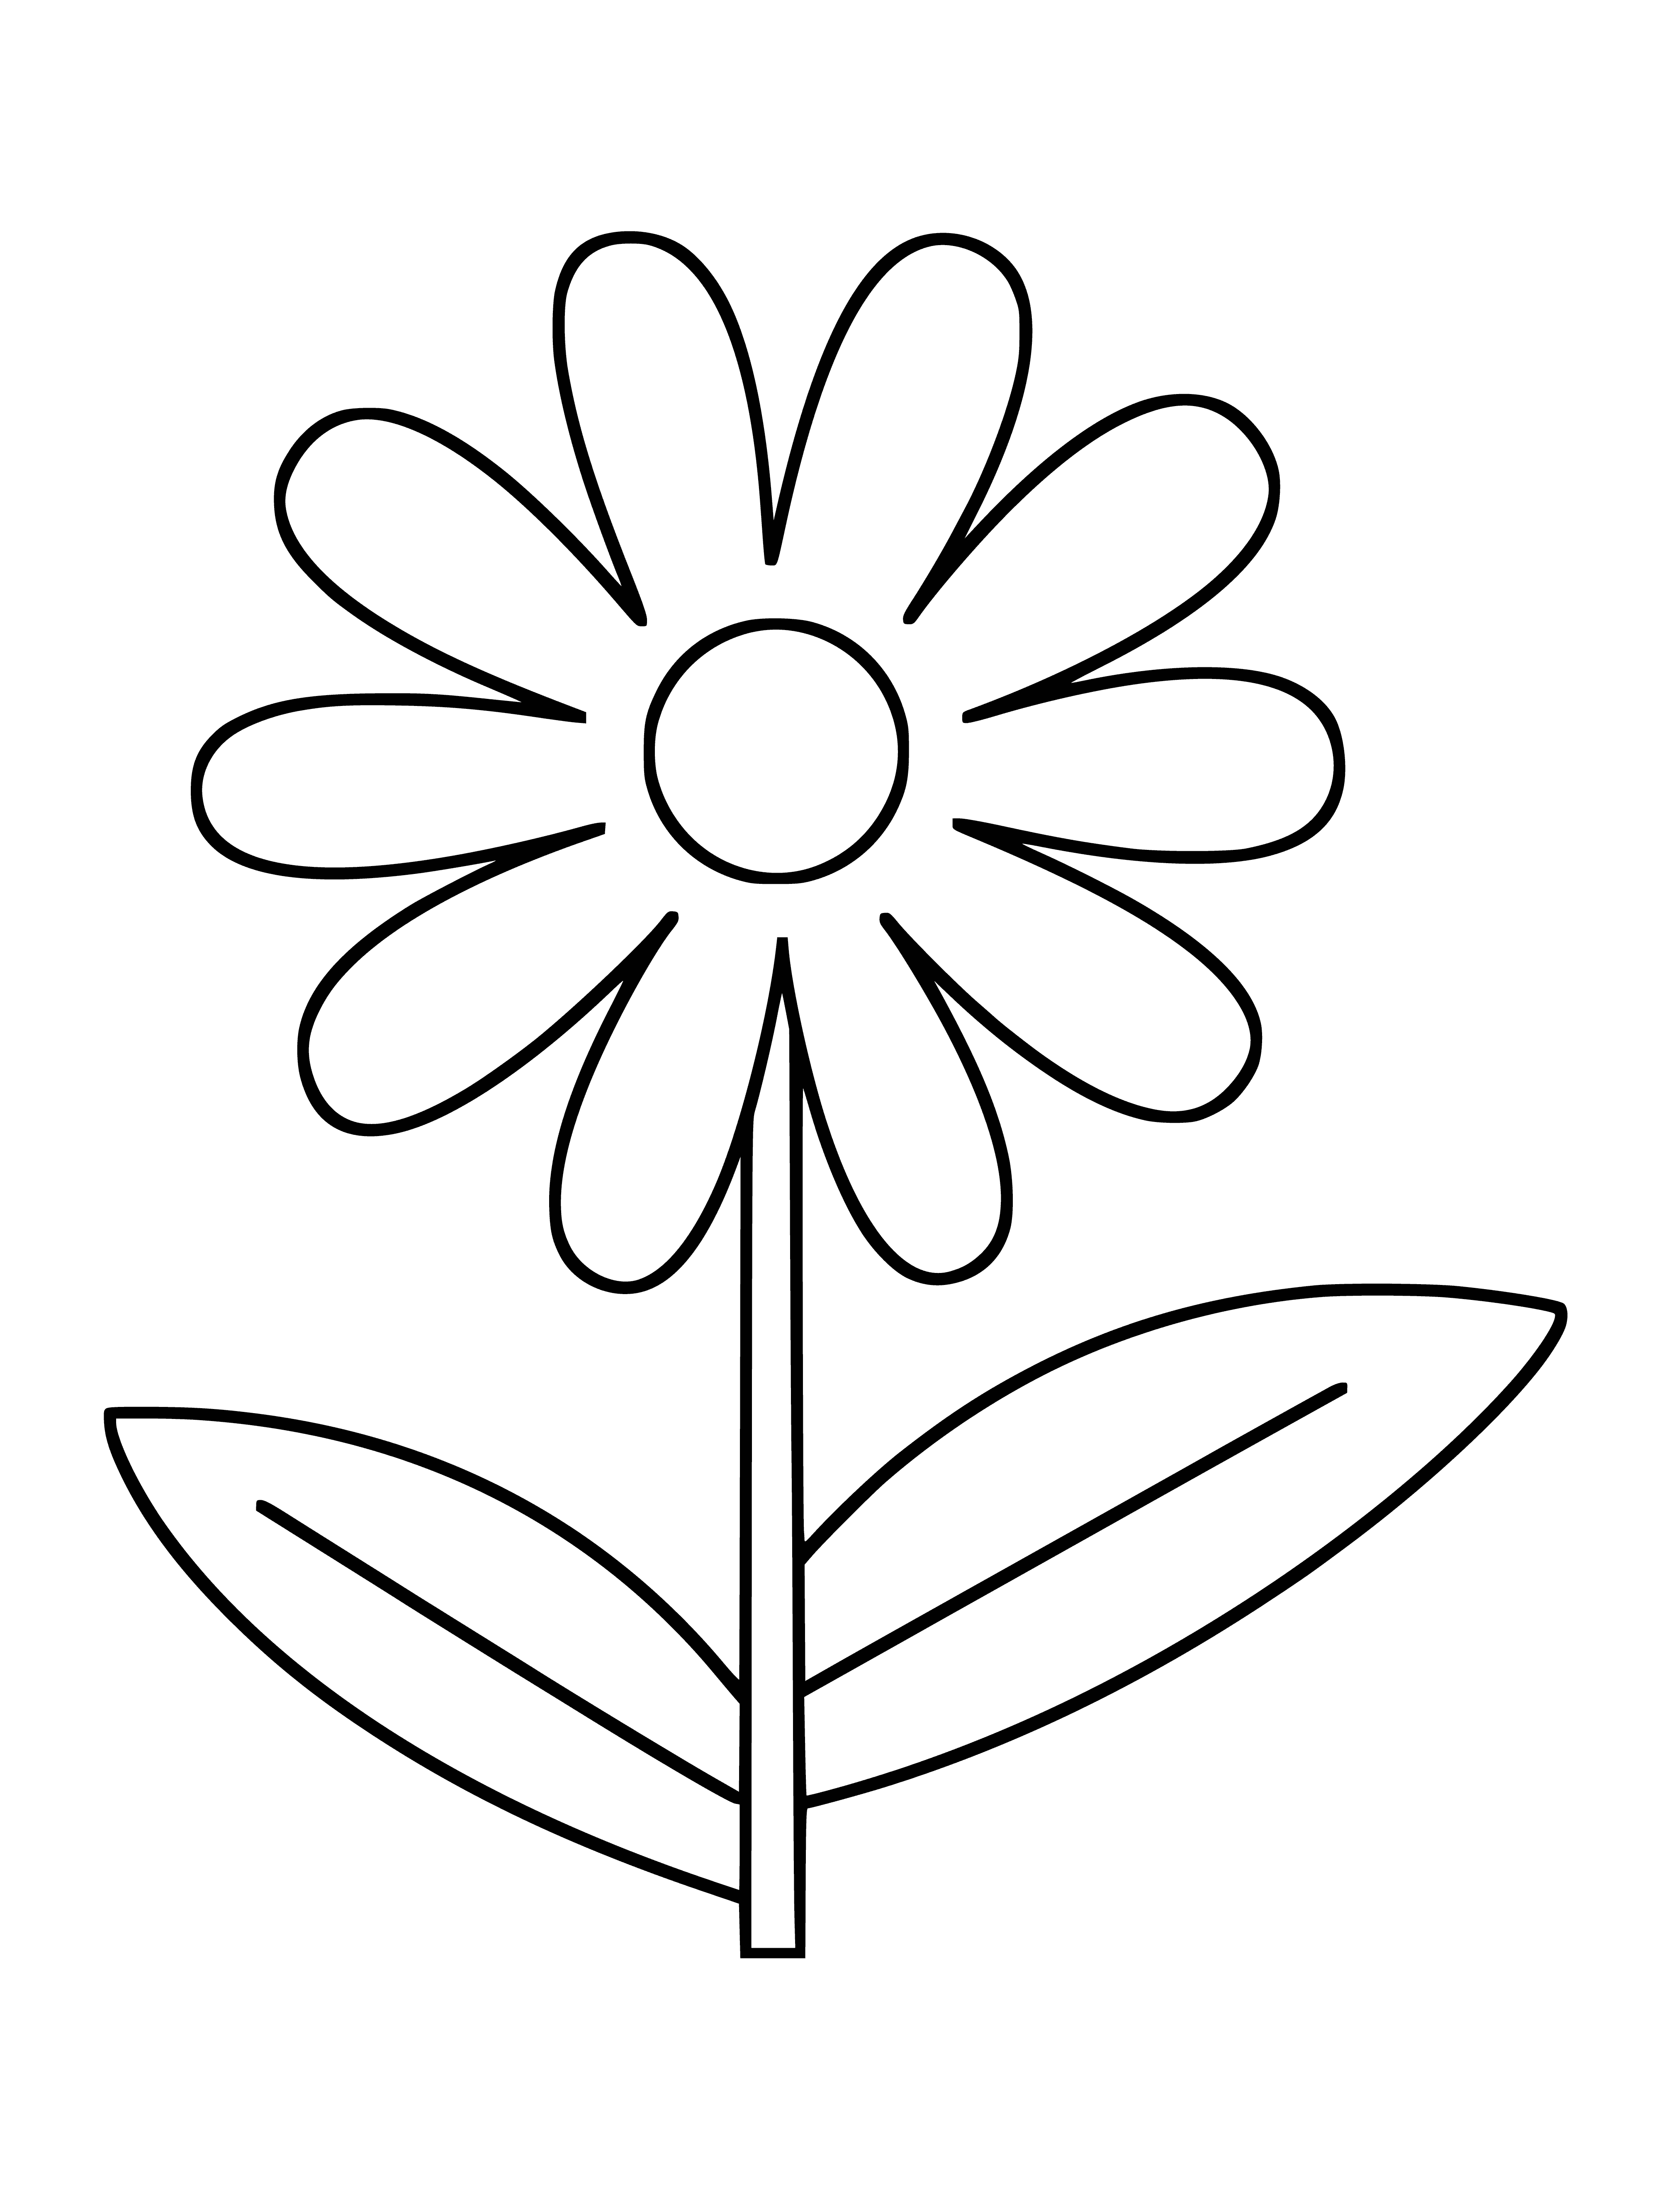 coloring page: Chamomile flowers have white & yellow petals, fringed edges, & yellow pollen in the center. Long, thin leaves & multiple flowers on a stalk.